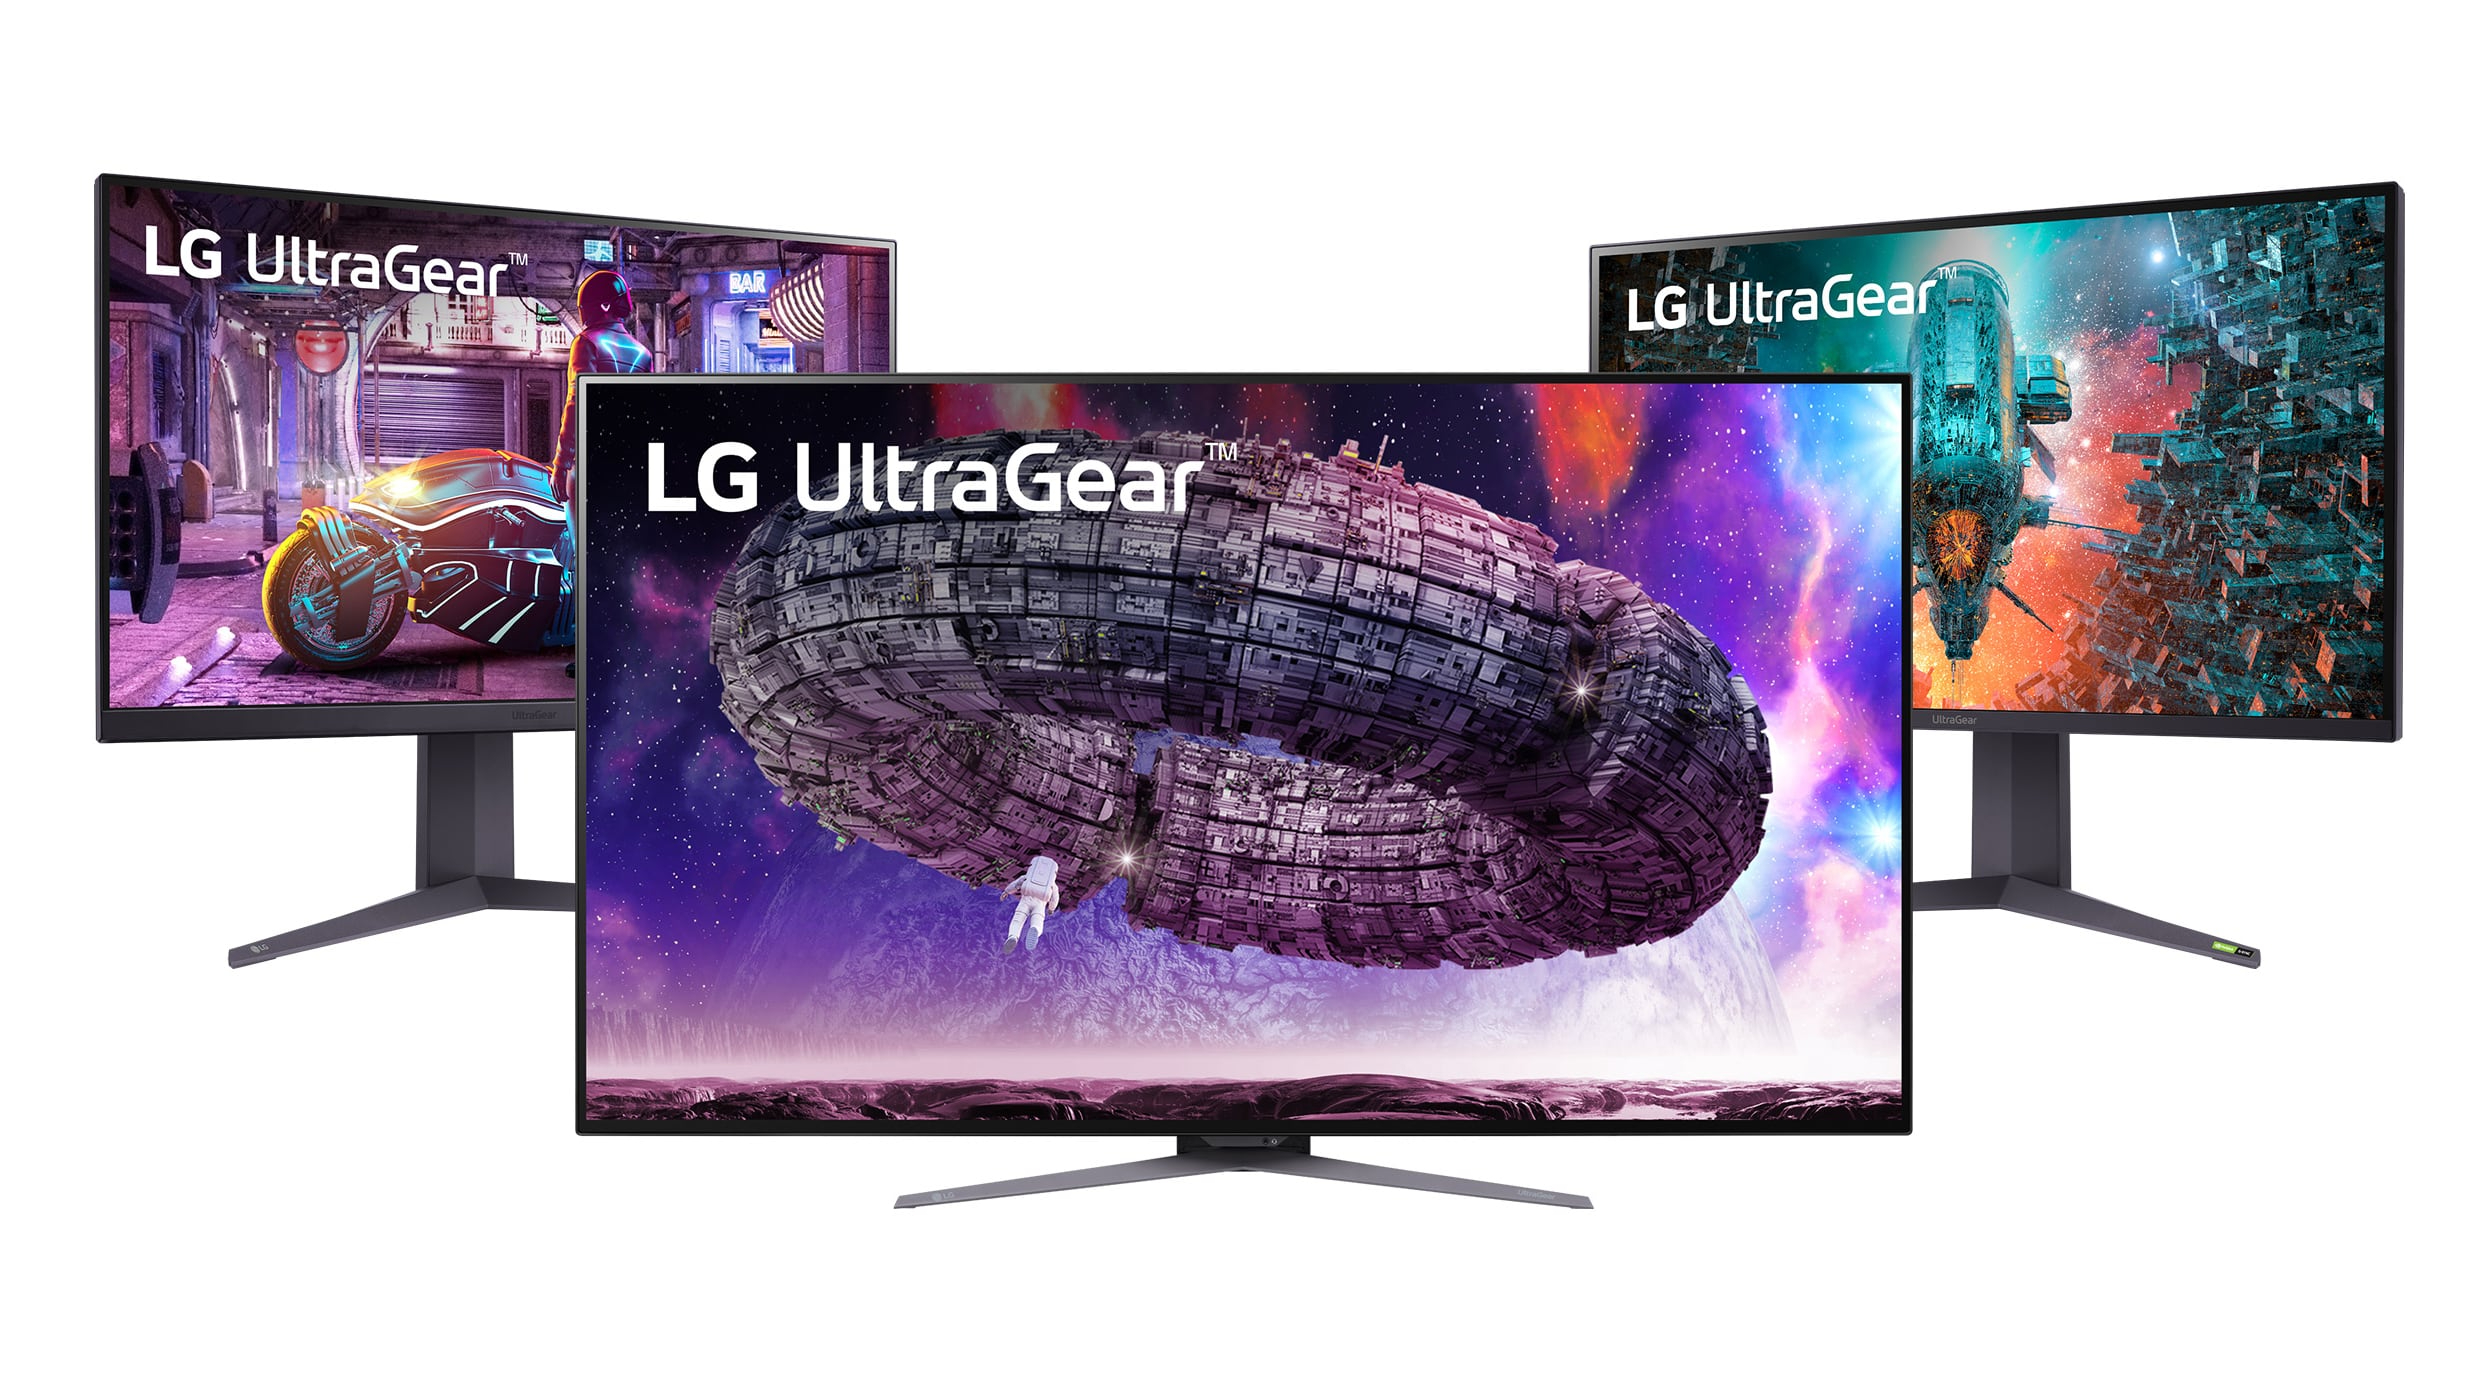 LG's New UltraGear Lineup Includes 48-inch 138Hz OLED Gaming Display